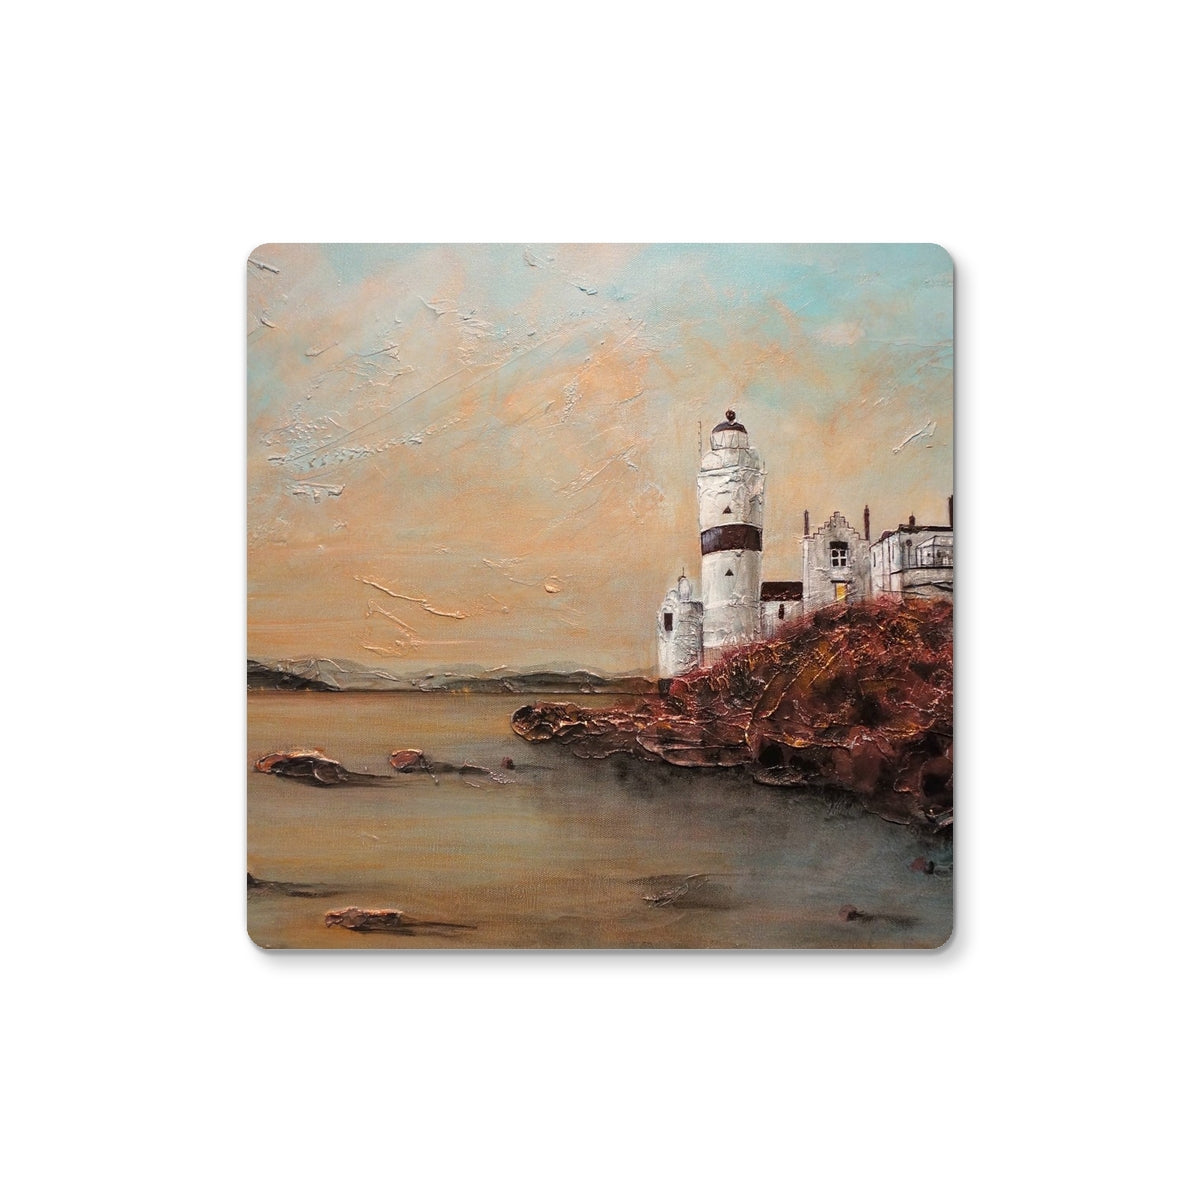 Cloch Lighthouse Dawn Art Gifts Coaster-Coasters-River Clyde Art Gallery-2 Coasters-Paintings, Prints, Homeware, Art Gifts From Scotland By Scottish Artist Kevin Hunter